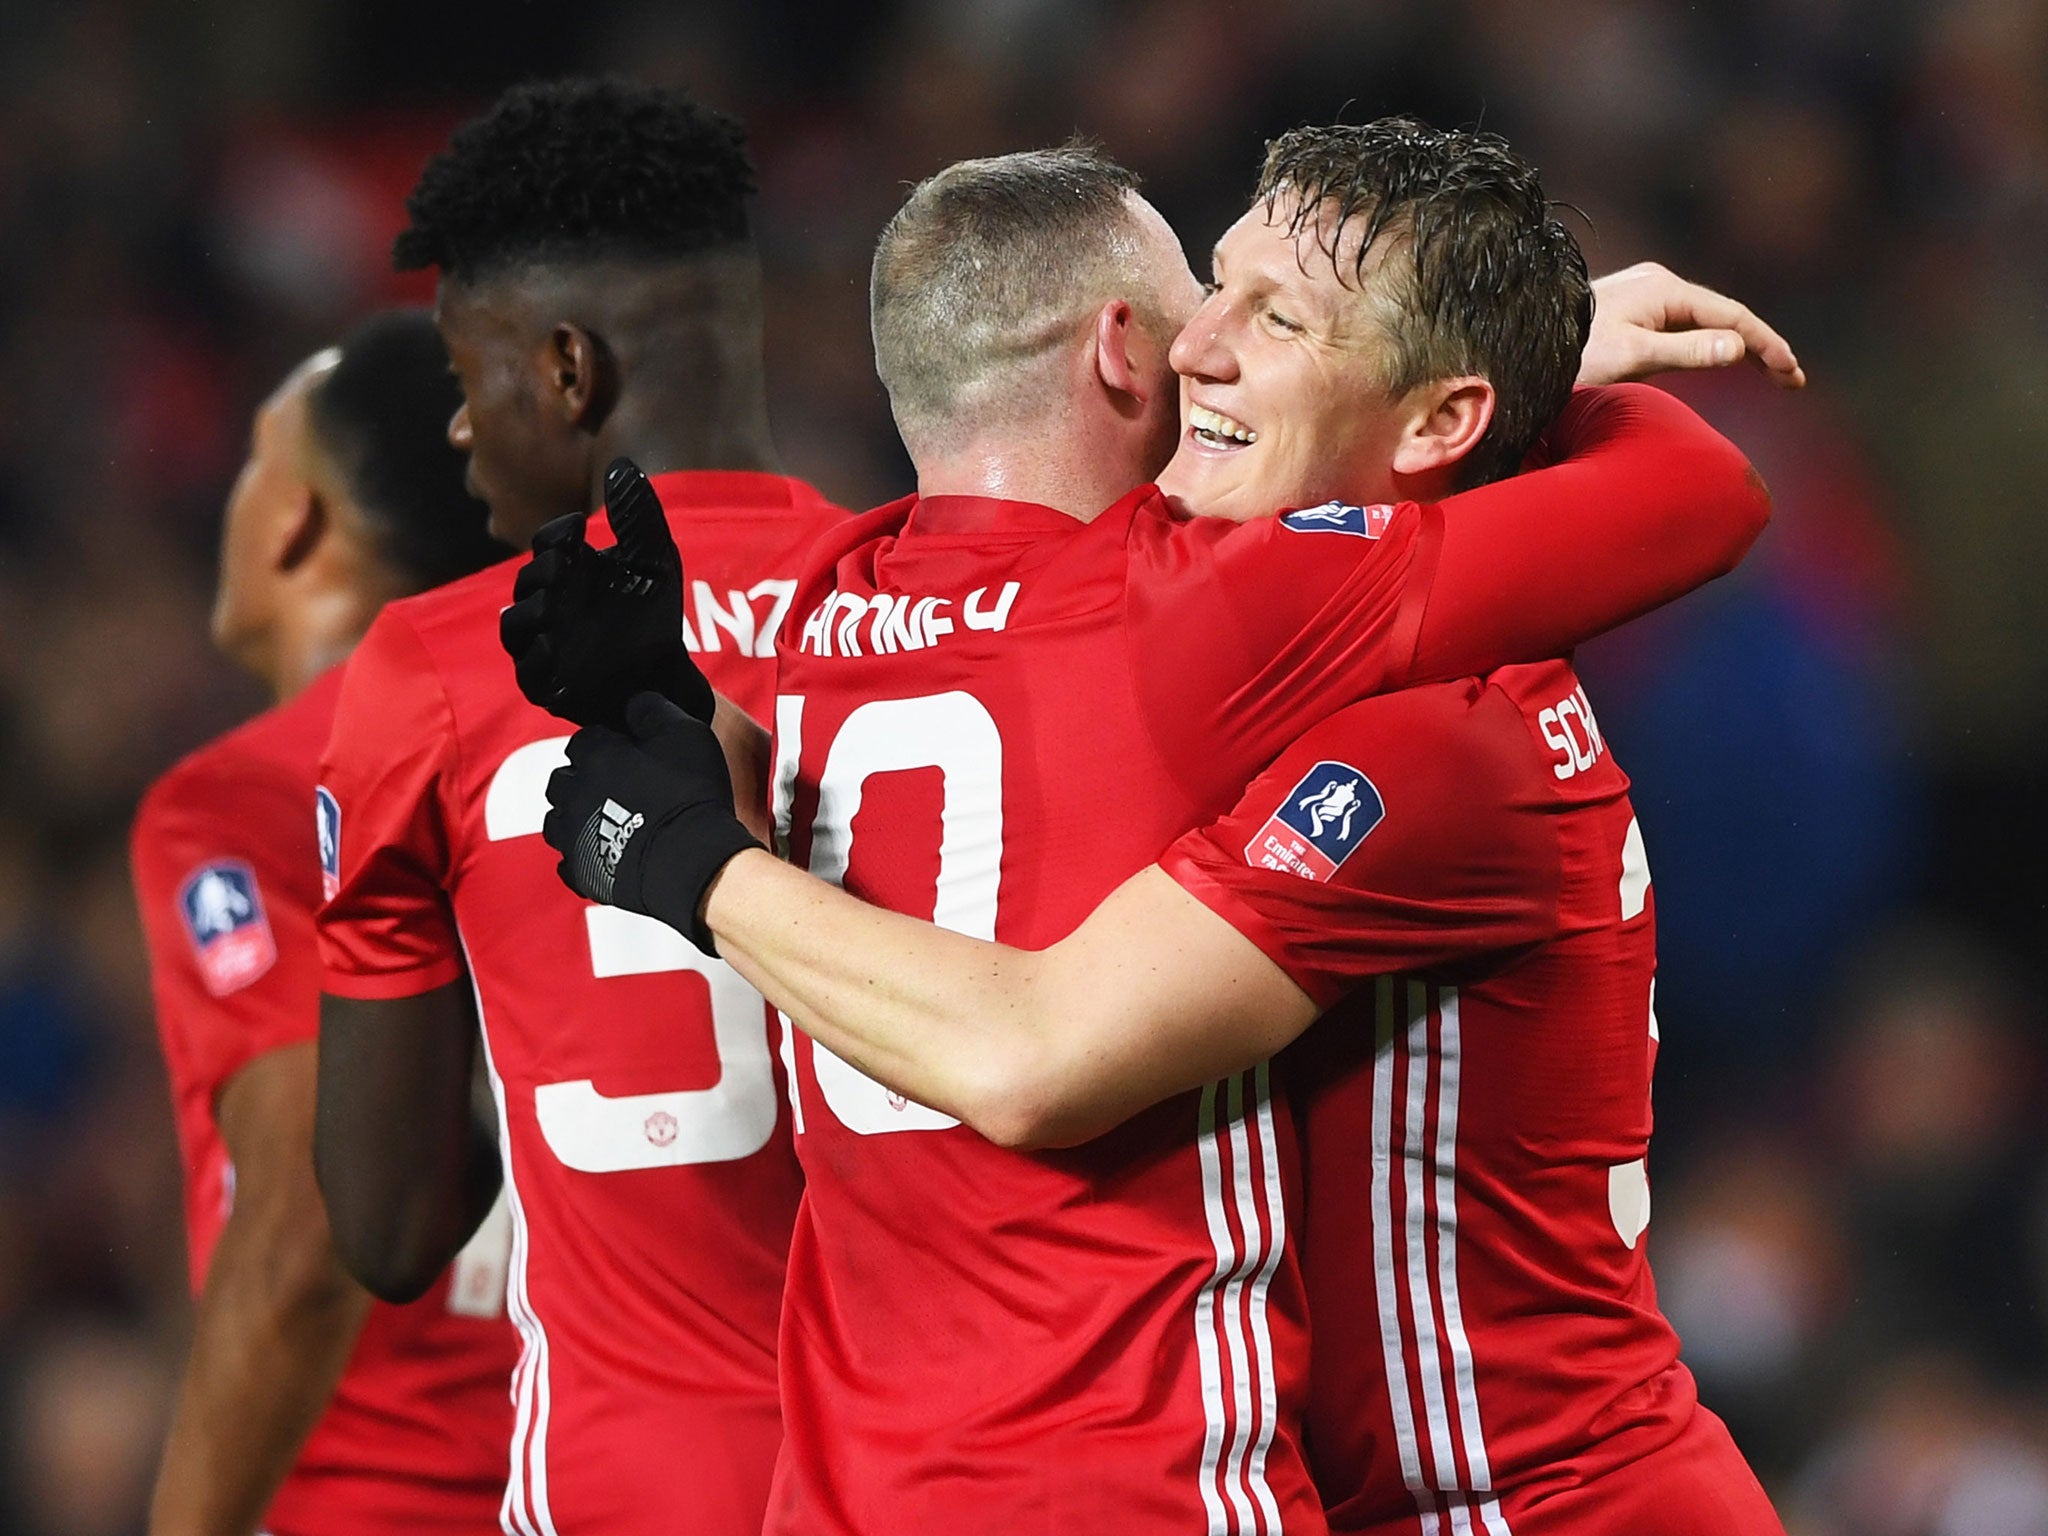 Schweinsteiger helped inspire United to a comfortable victory at Old Trafford